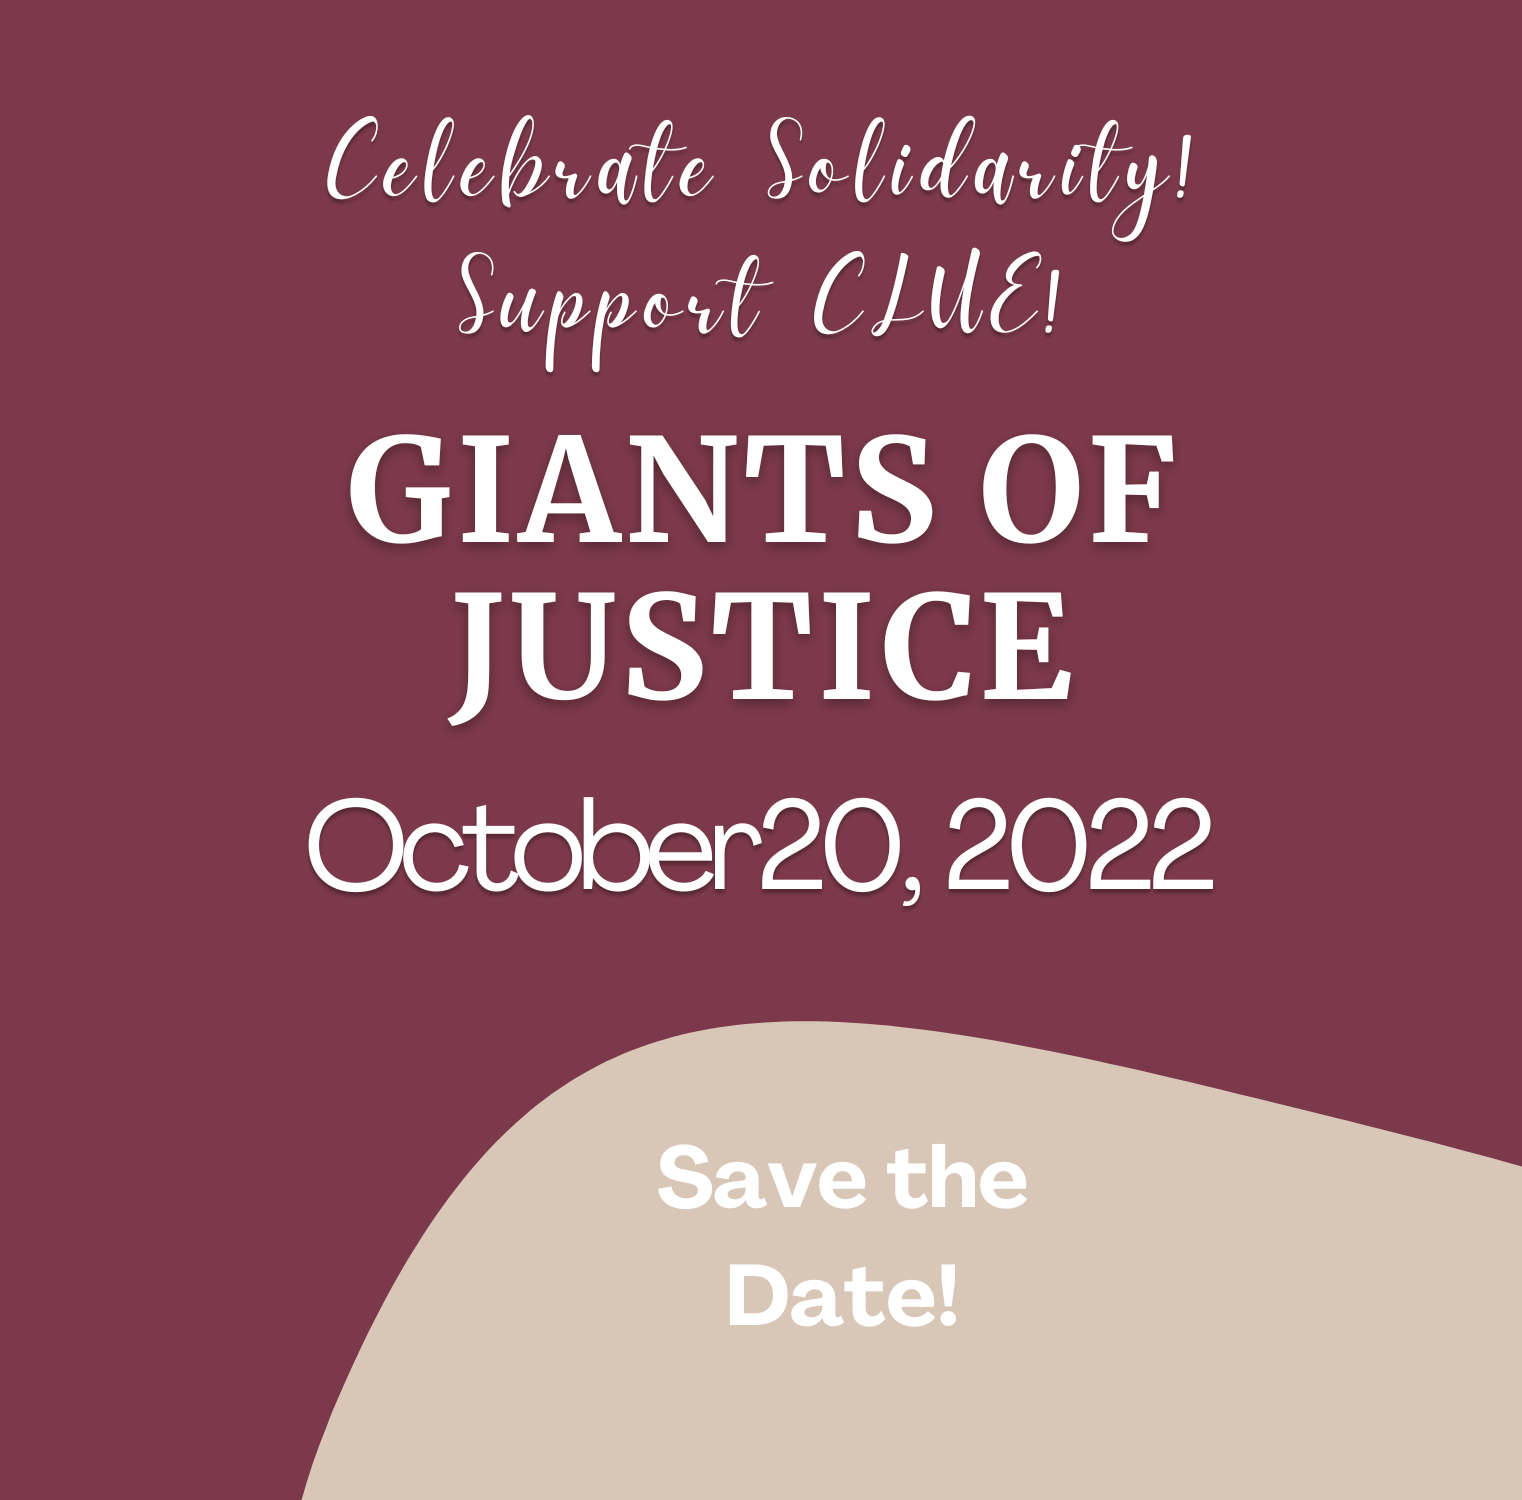 Join us for Giants of Justice!